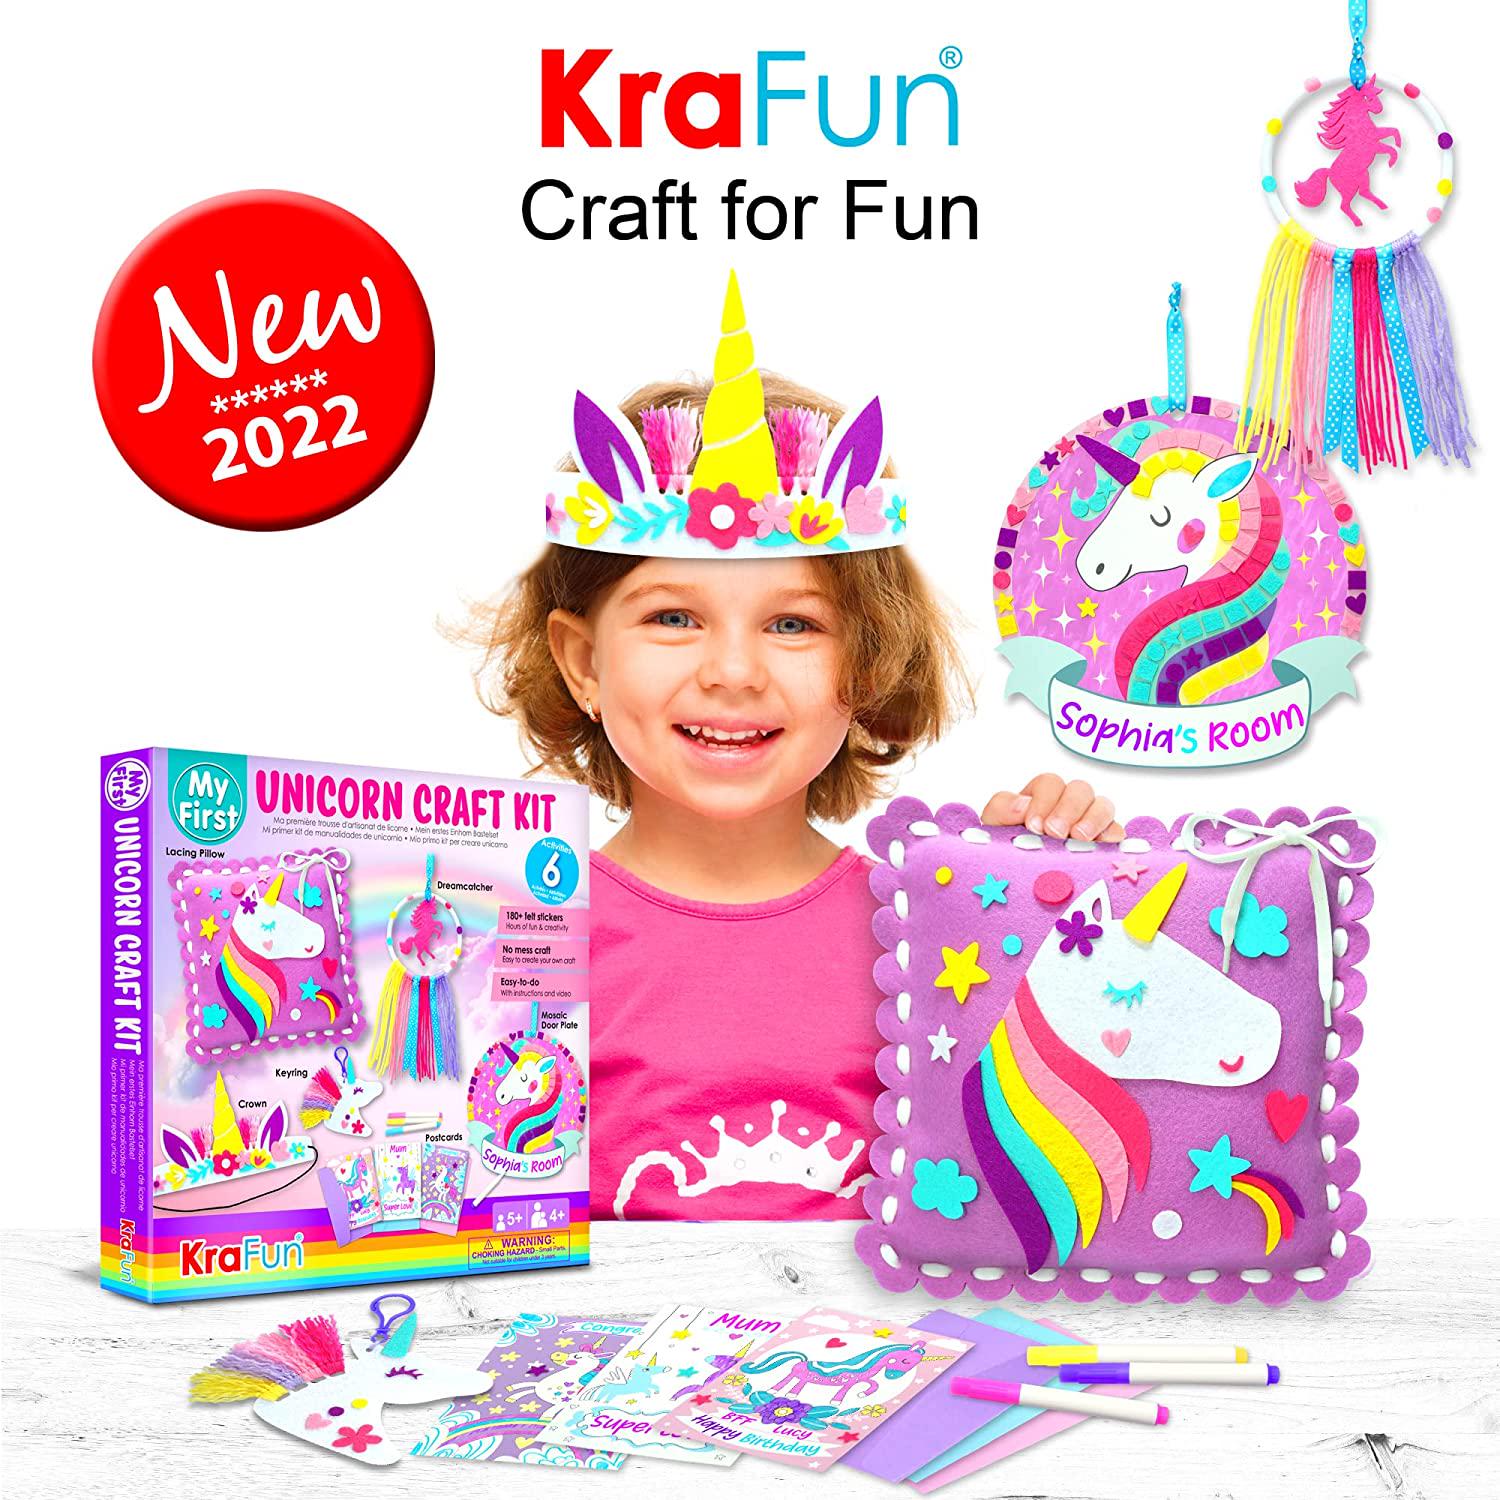 KRAFUN, KraFun My First Unicorn Art and Craft Kit for Young Kids Beginner, Includes 6 Animal Projects, Instructions and Felt, Paper Materials for Learning to Lace, Sew, Coloring, Make Dreamcatcher, Mosaic Charm